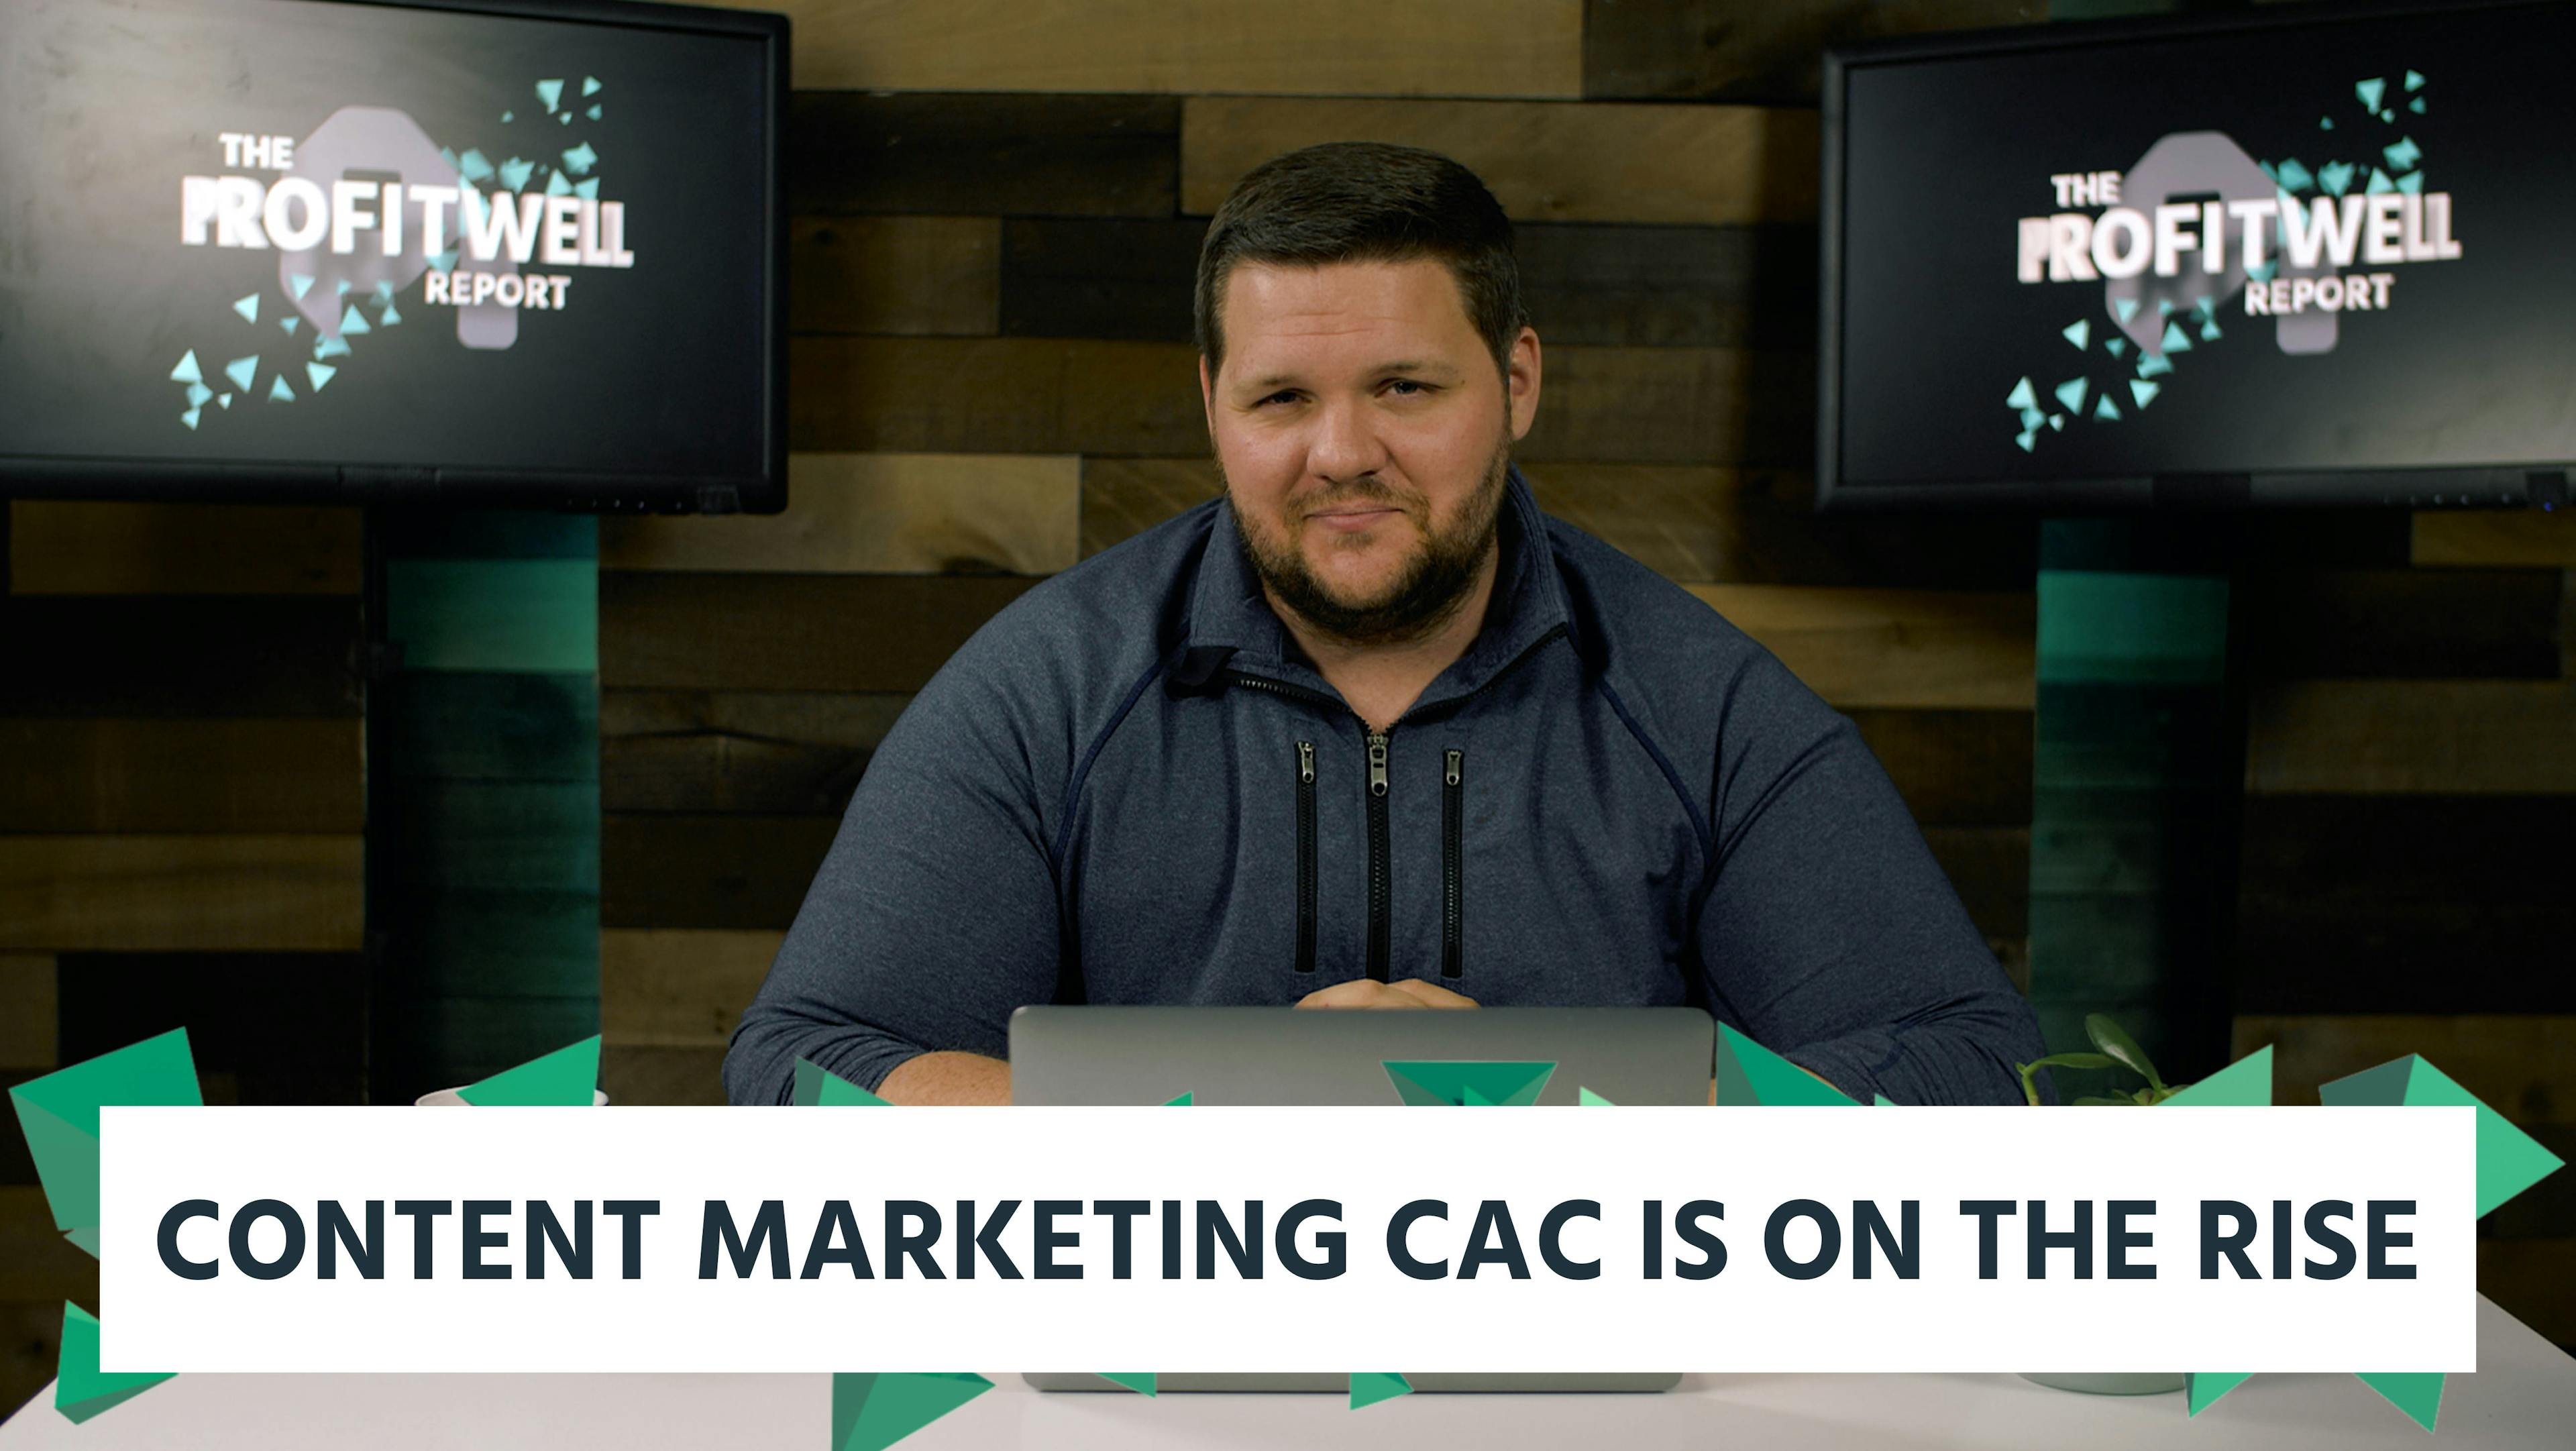 Content Marketing CAC is on the rise